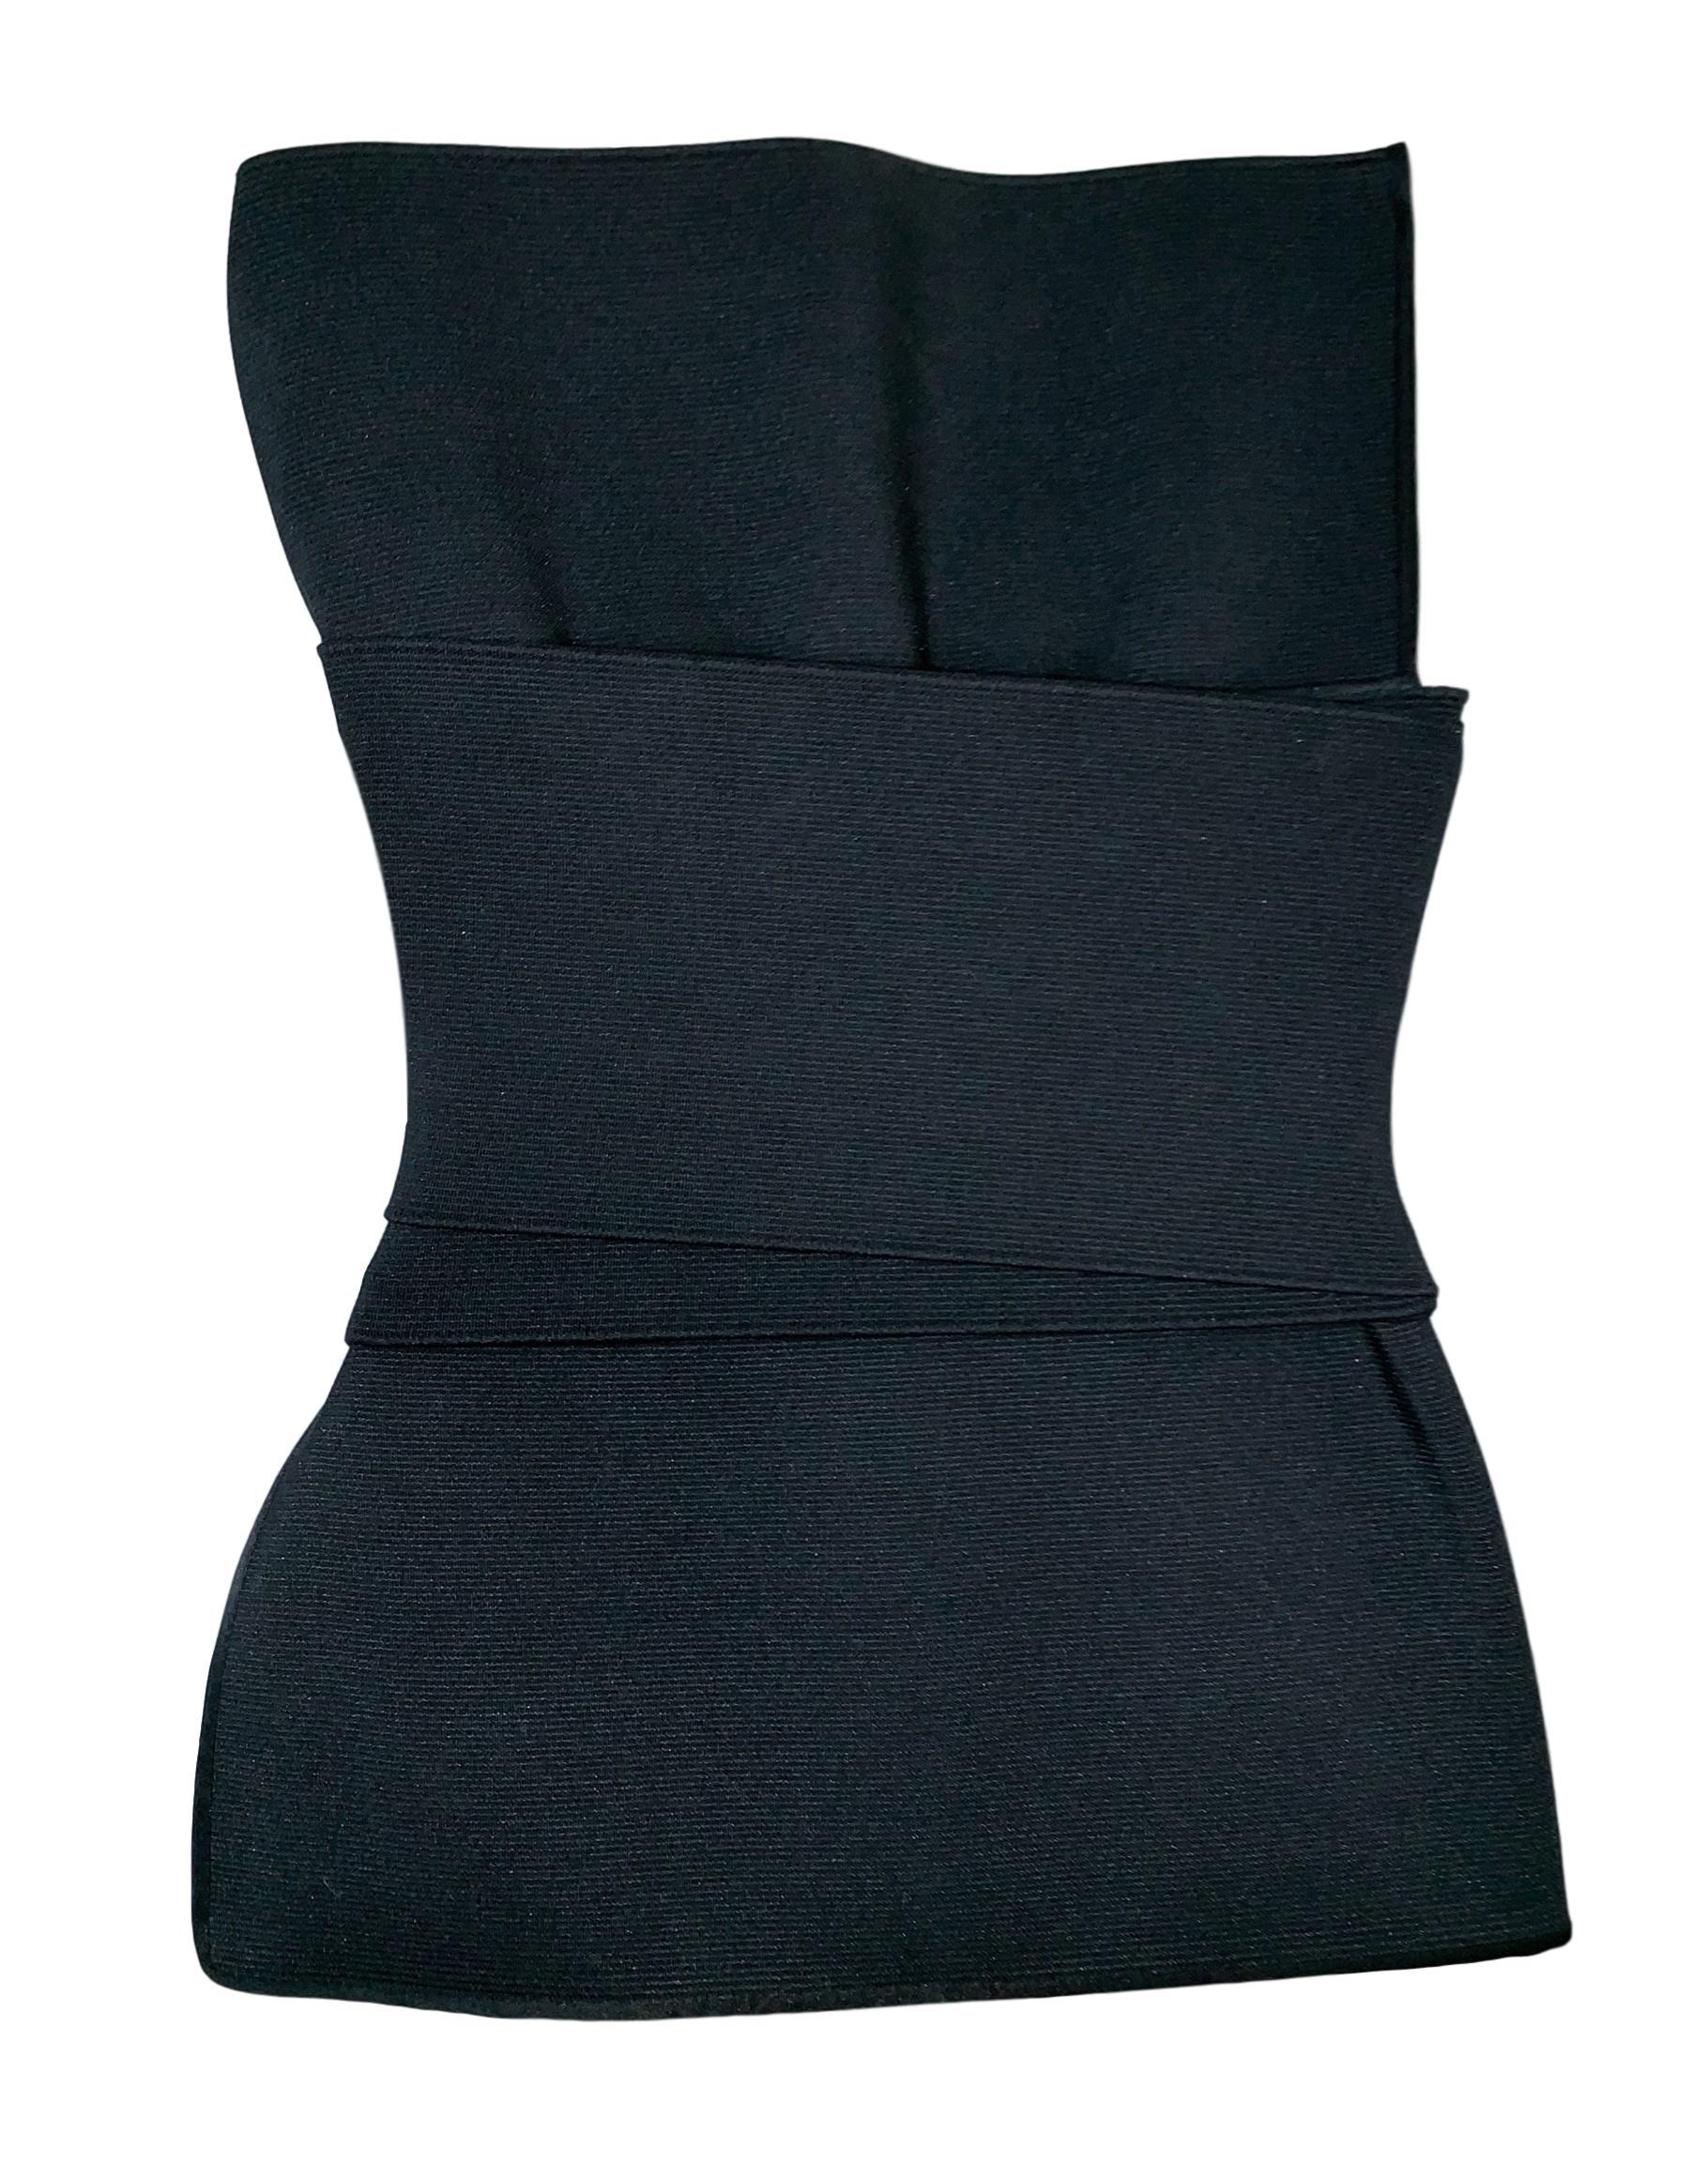 Women's S/S 2001 Yves Saint Laurent by Tom Ford Runway Black Bandage Wrap Bustier Top